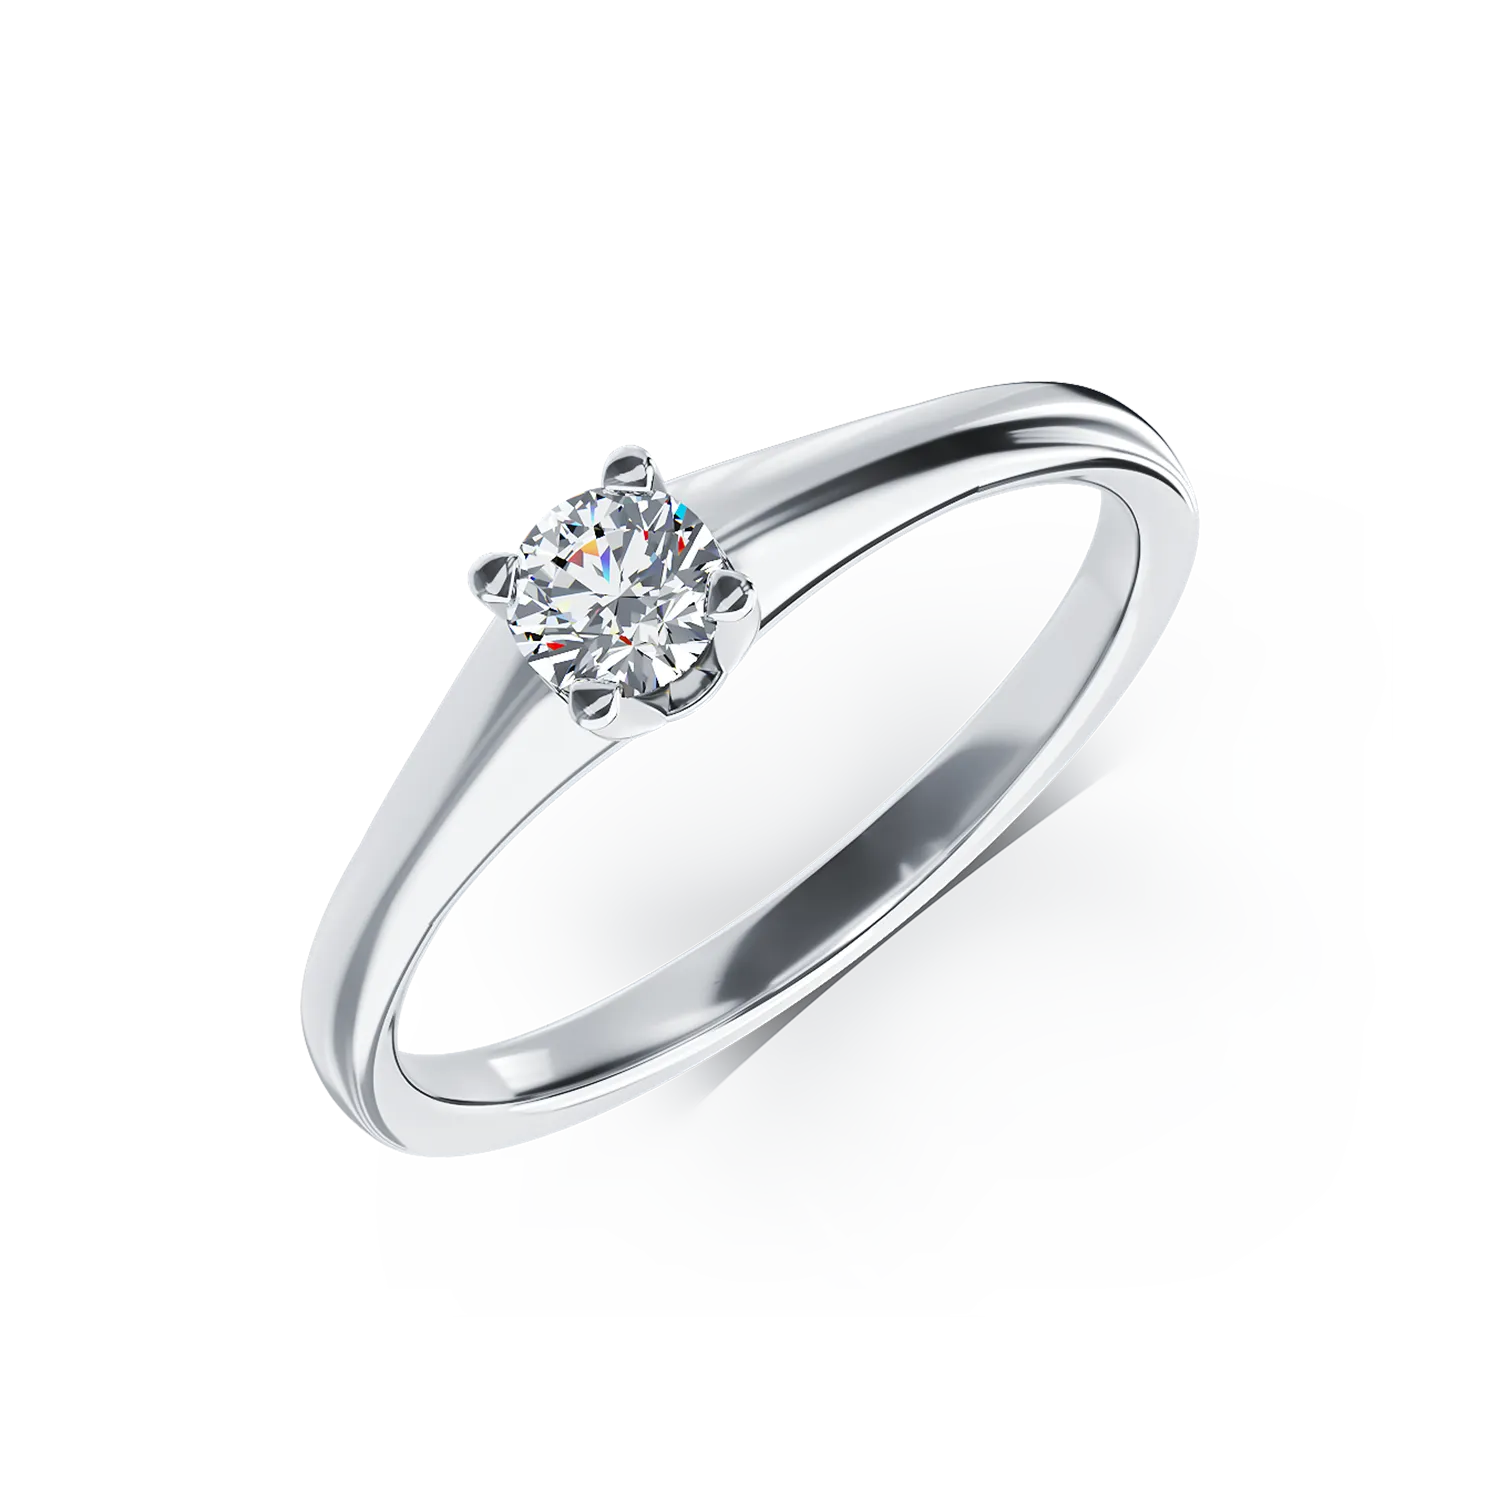 18K white gold engagement ring with a 0.205ct solitaire diamond